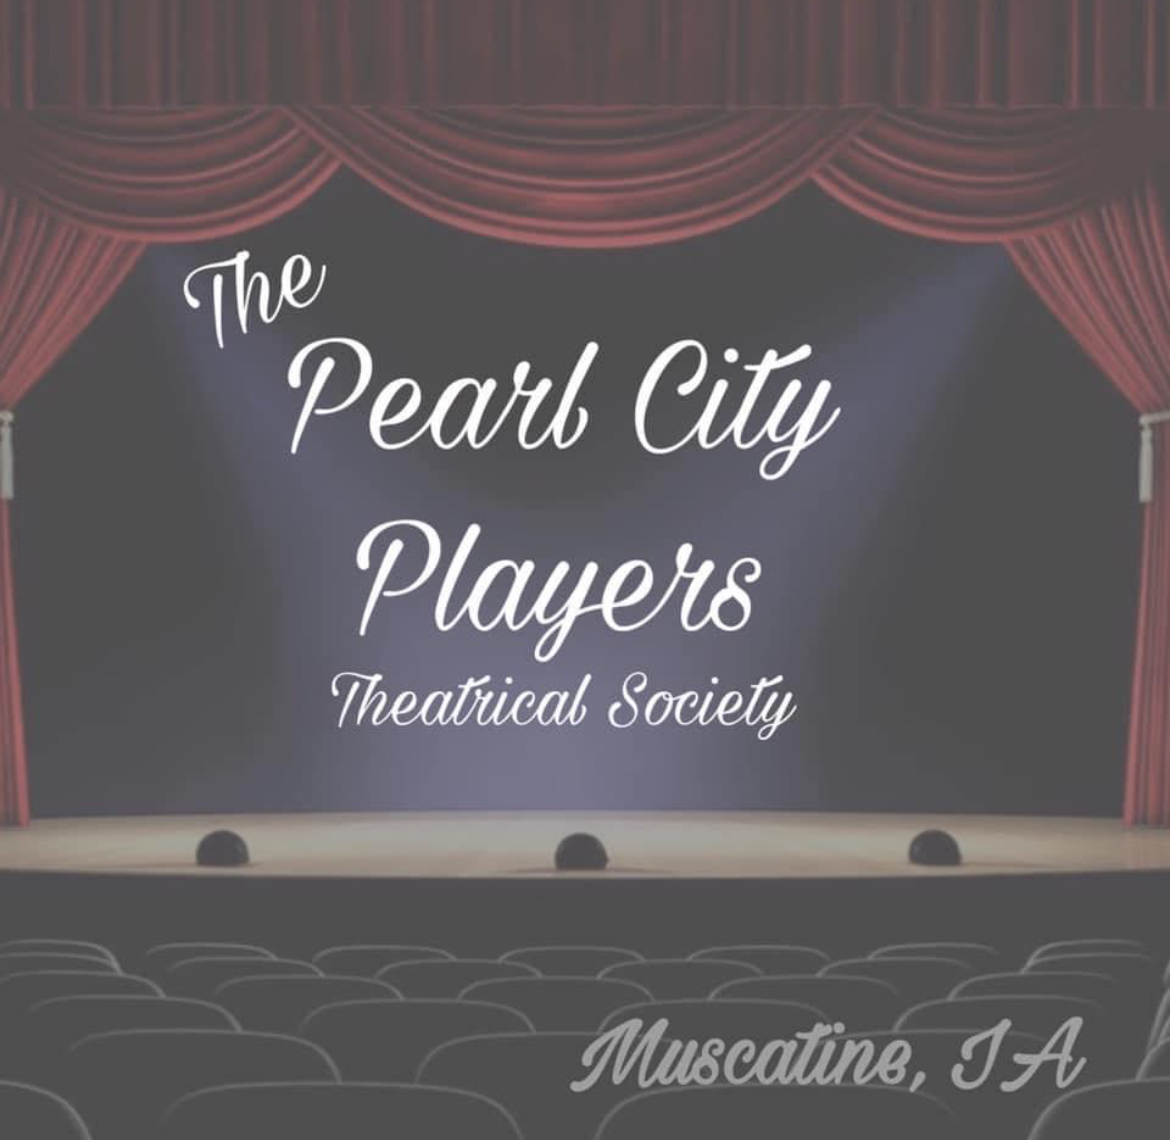 “Be Part of the Story” - Live Recordings from Pearl City Players - August 25 Image